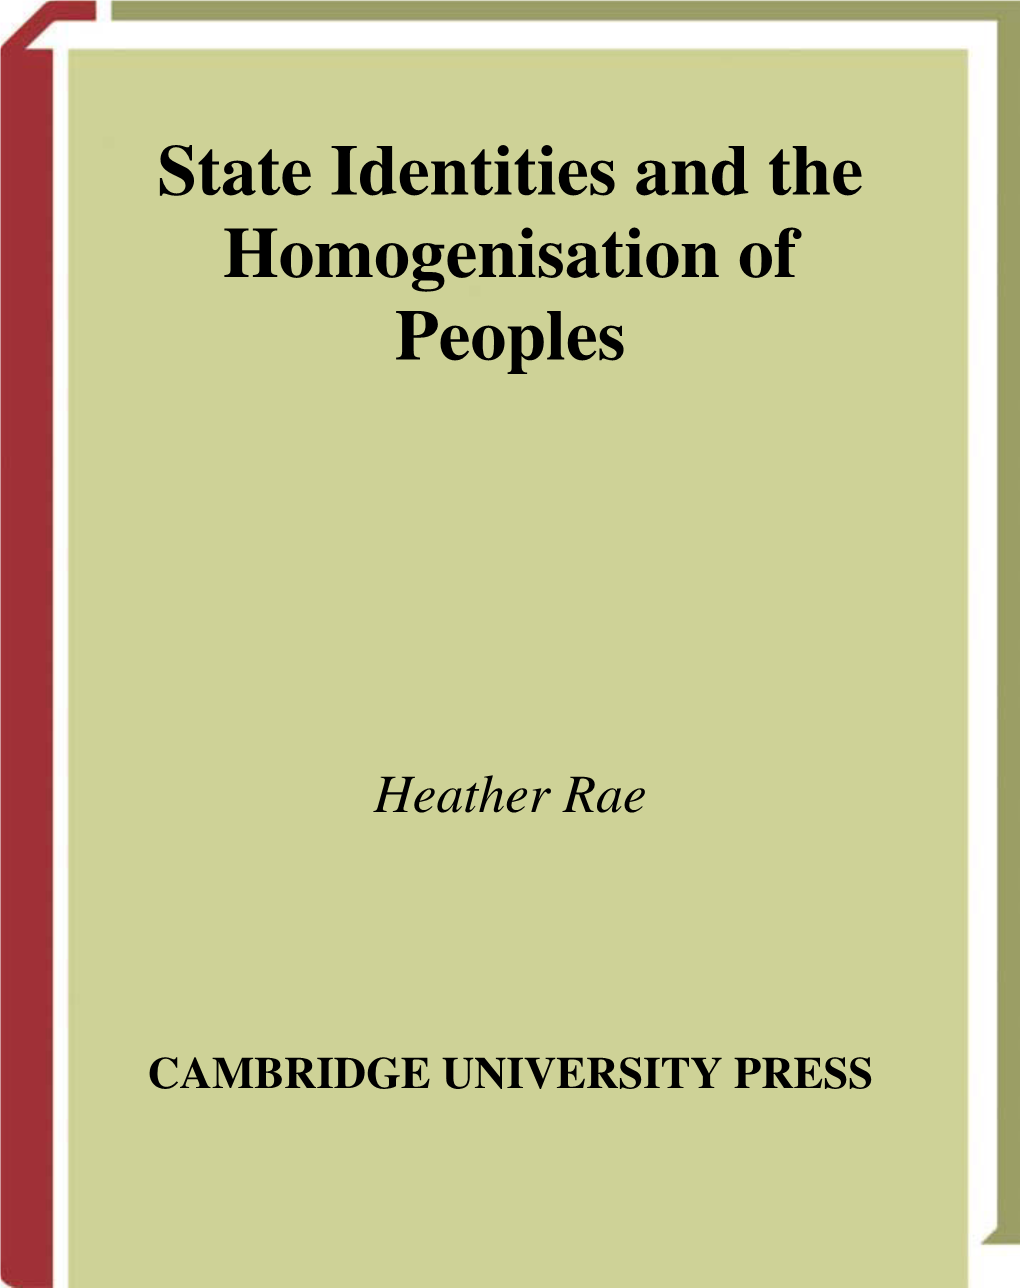 State Identities and the Homogenisation of Peoples